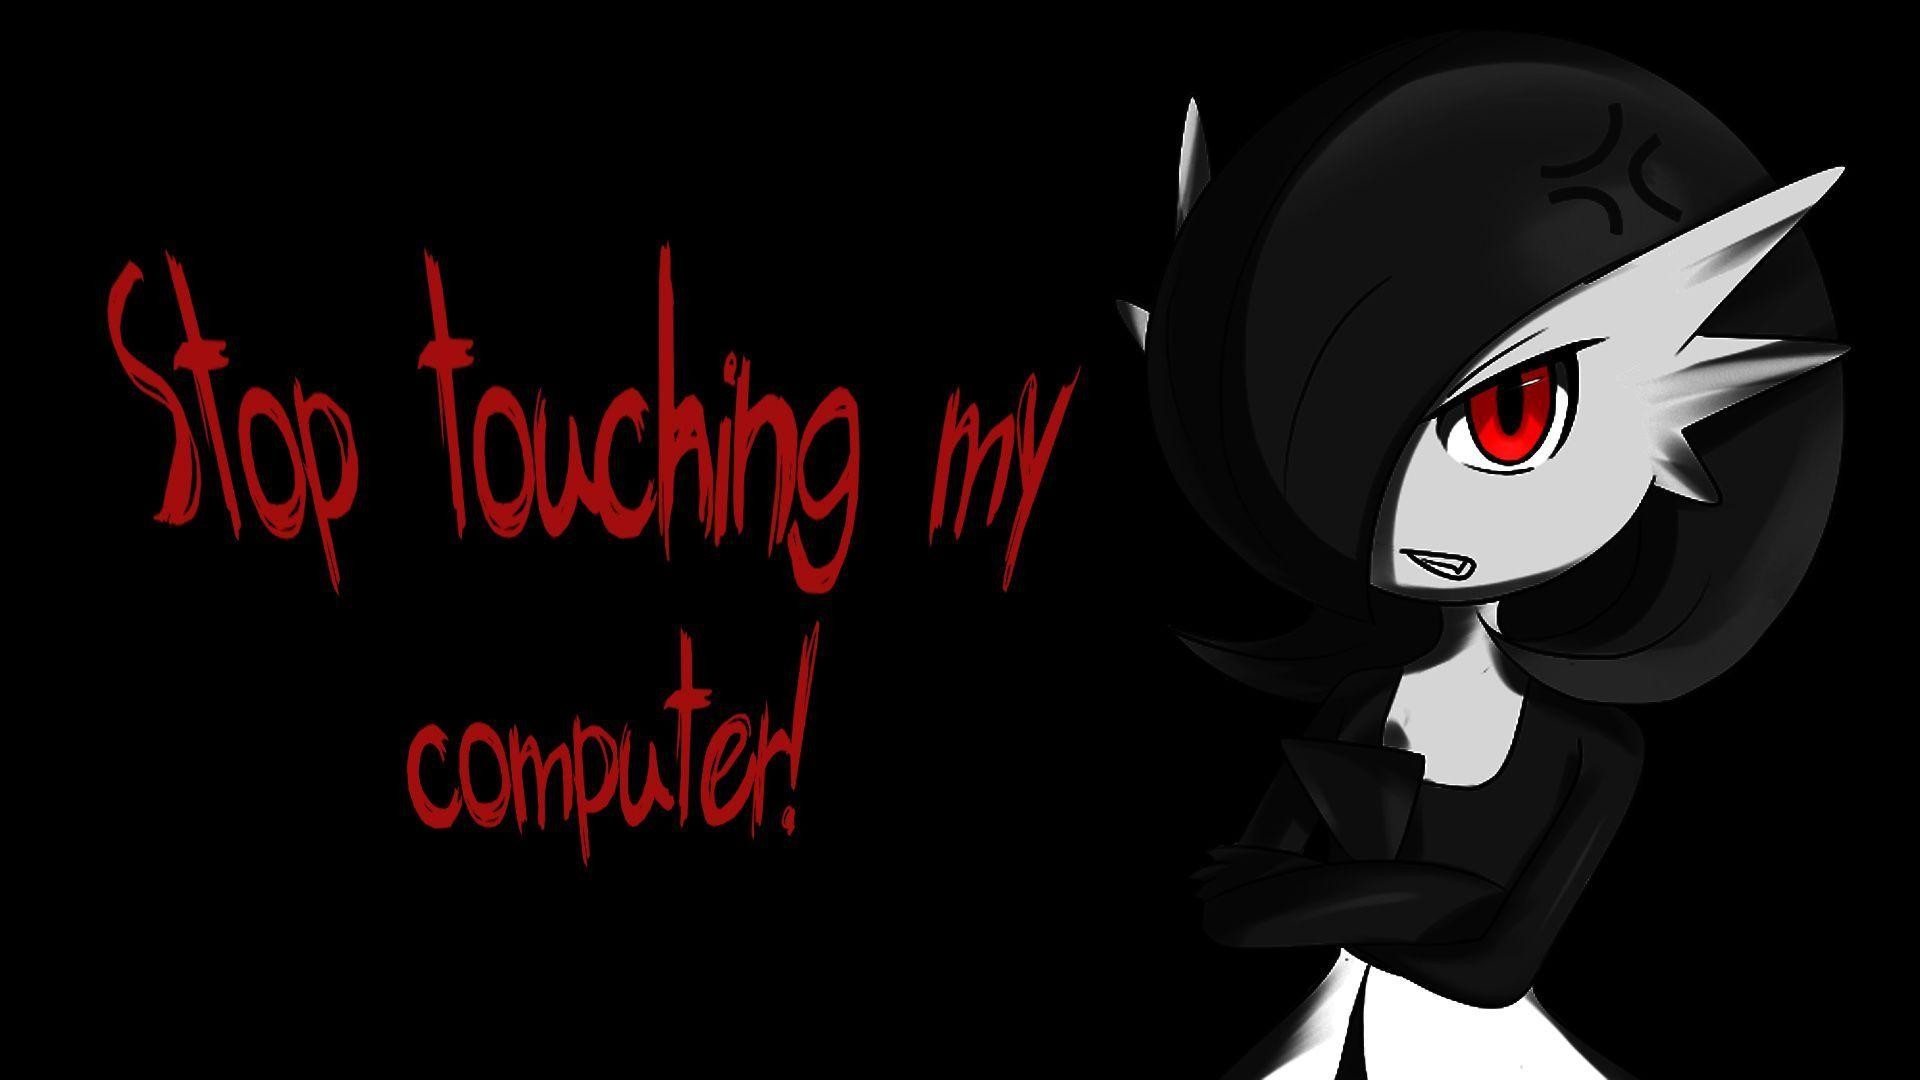 1920x1080 Don't touch my computer! (Guardevoir) by Fimbulknight on DeviantArt